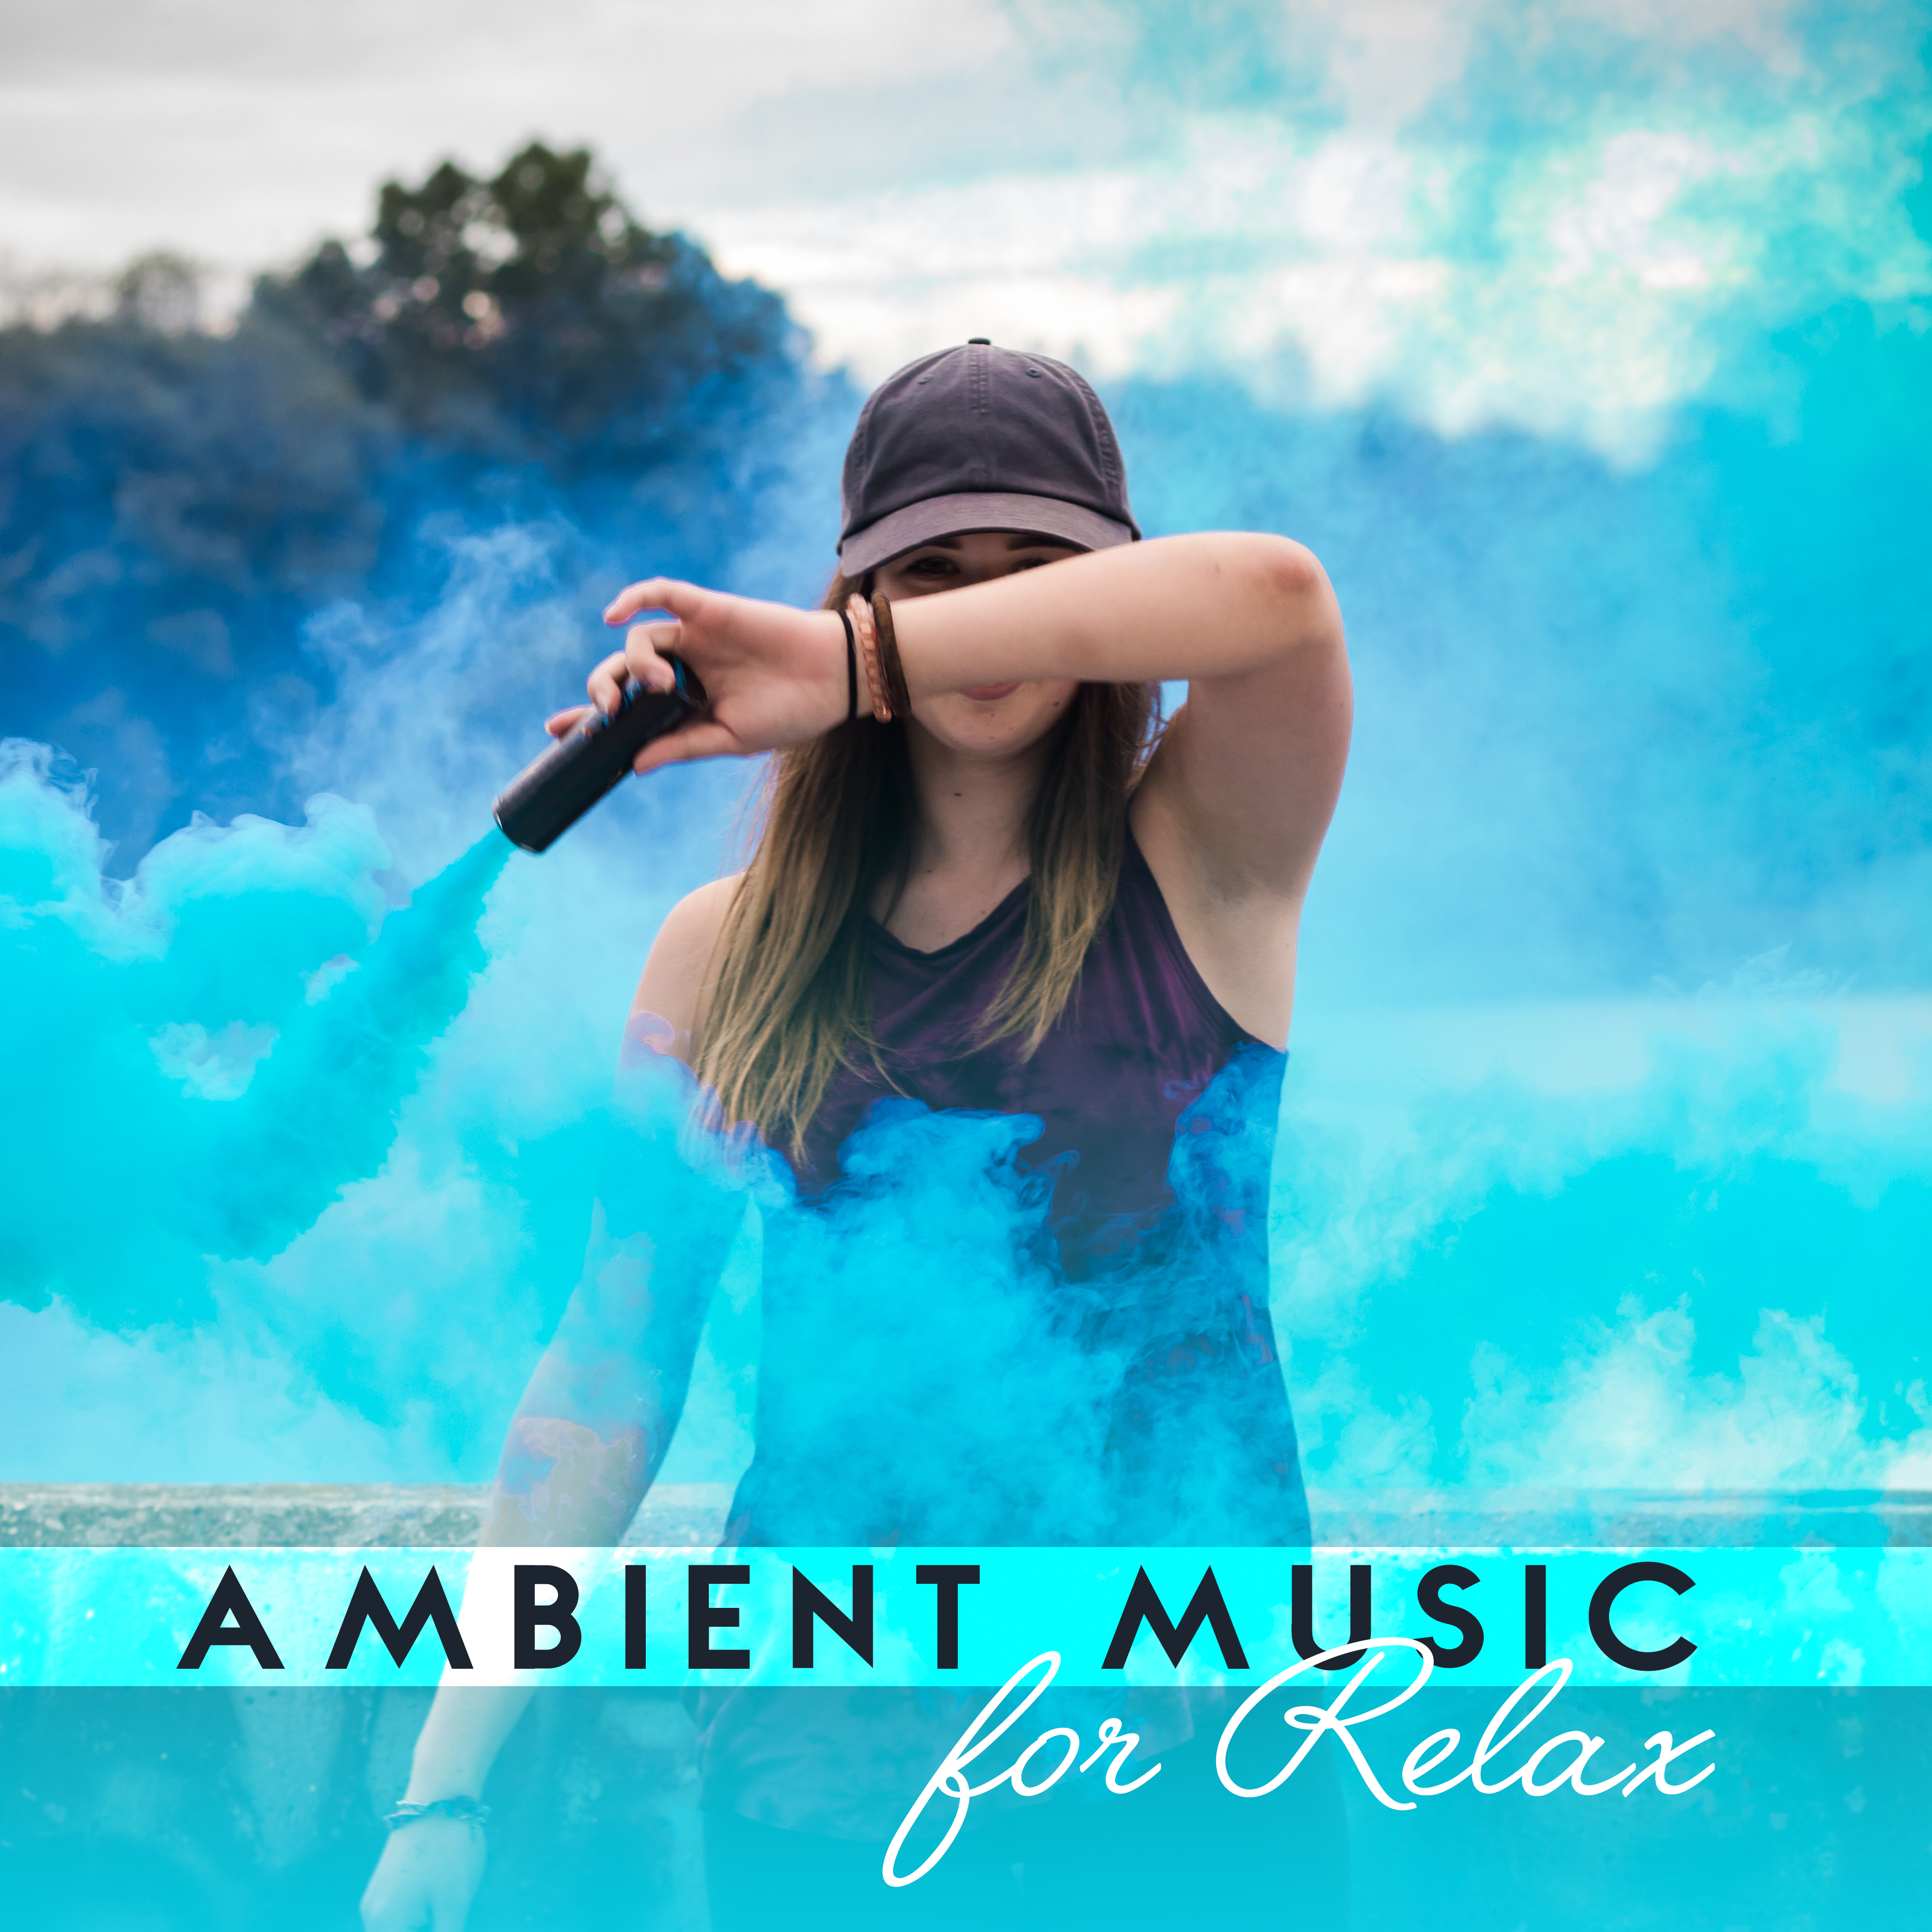 Ambient Music for Relax – New Age 2017, Deep Relaxation, Nature Sounds, Zen, Healing Music Therapy